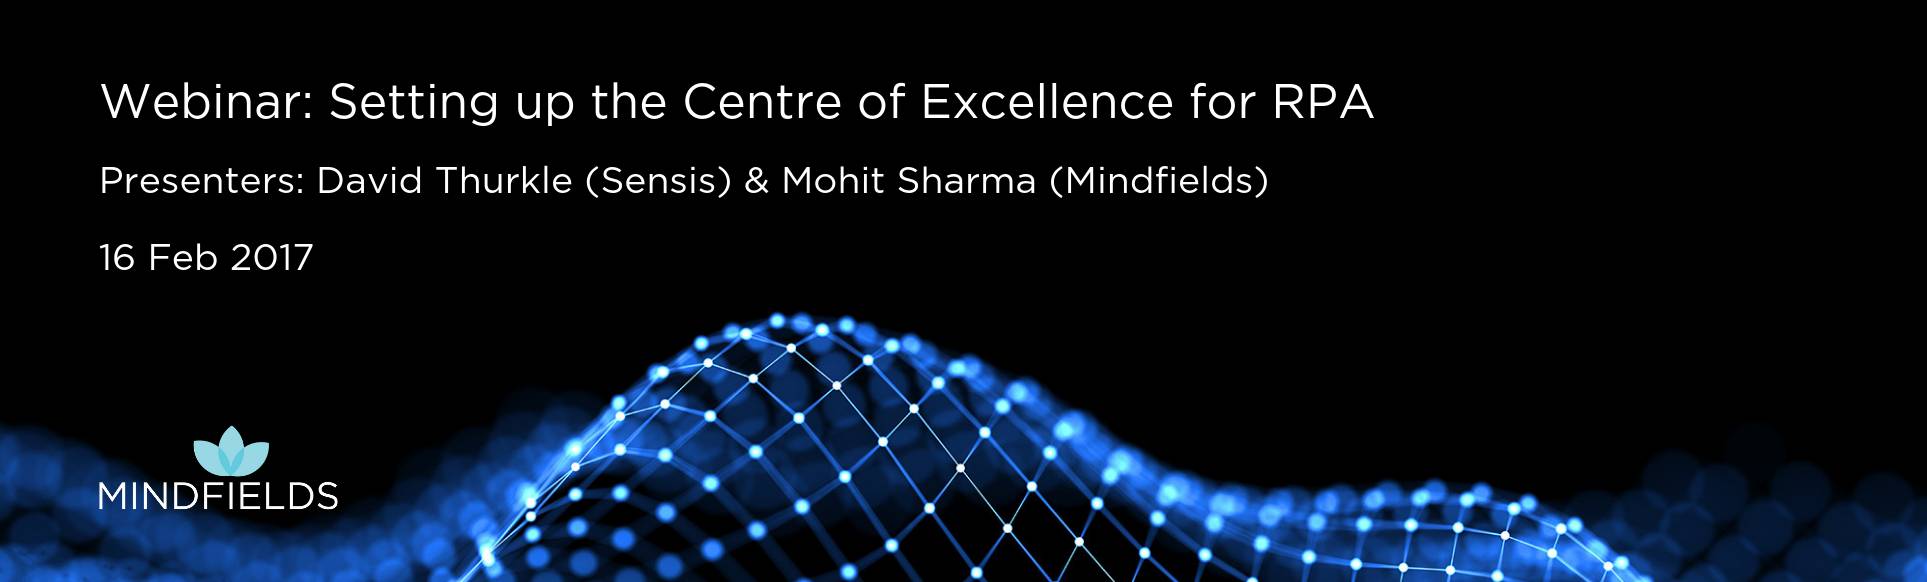 Setting up the Centre of Excellence for RPA Webinar